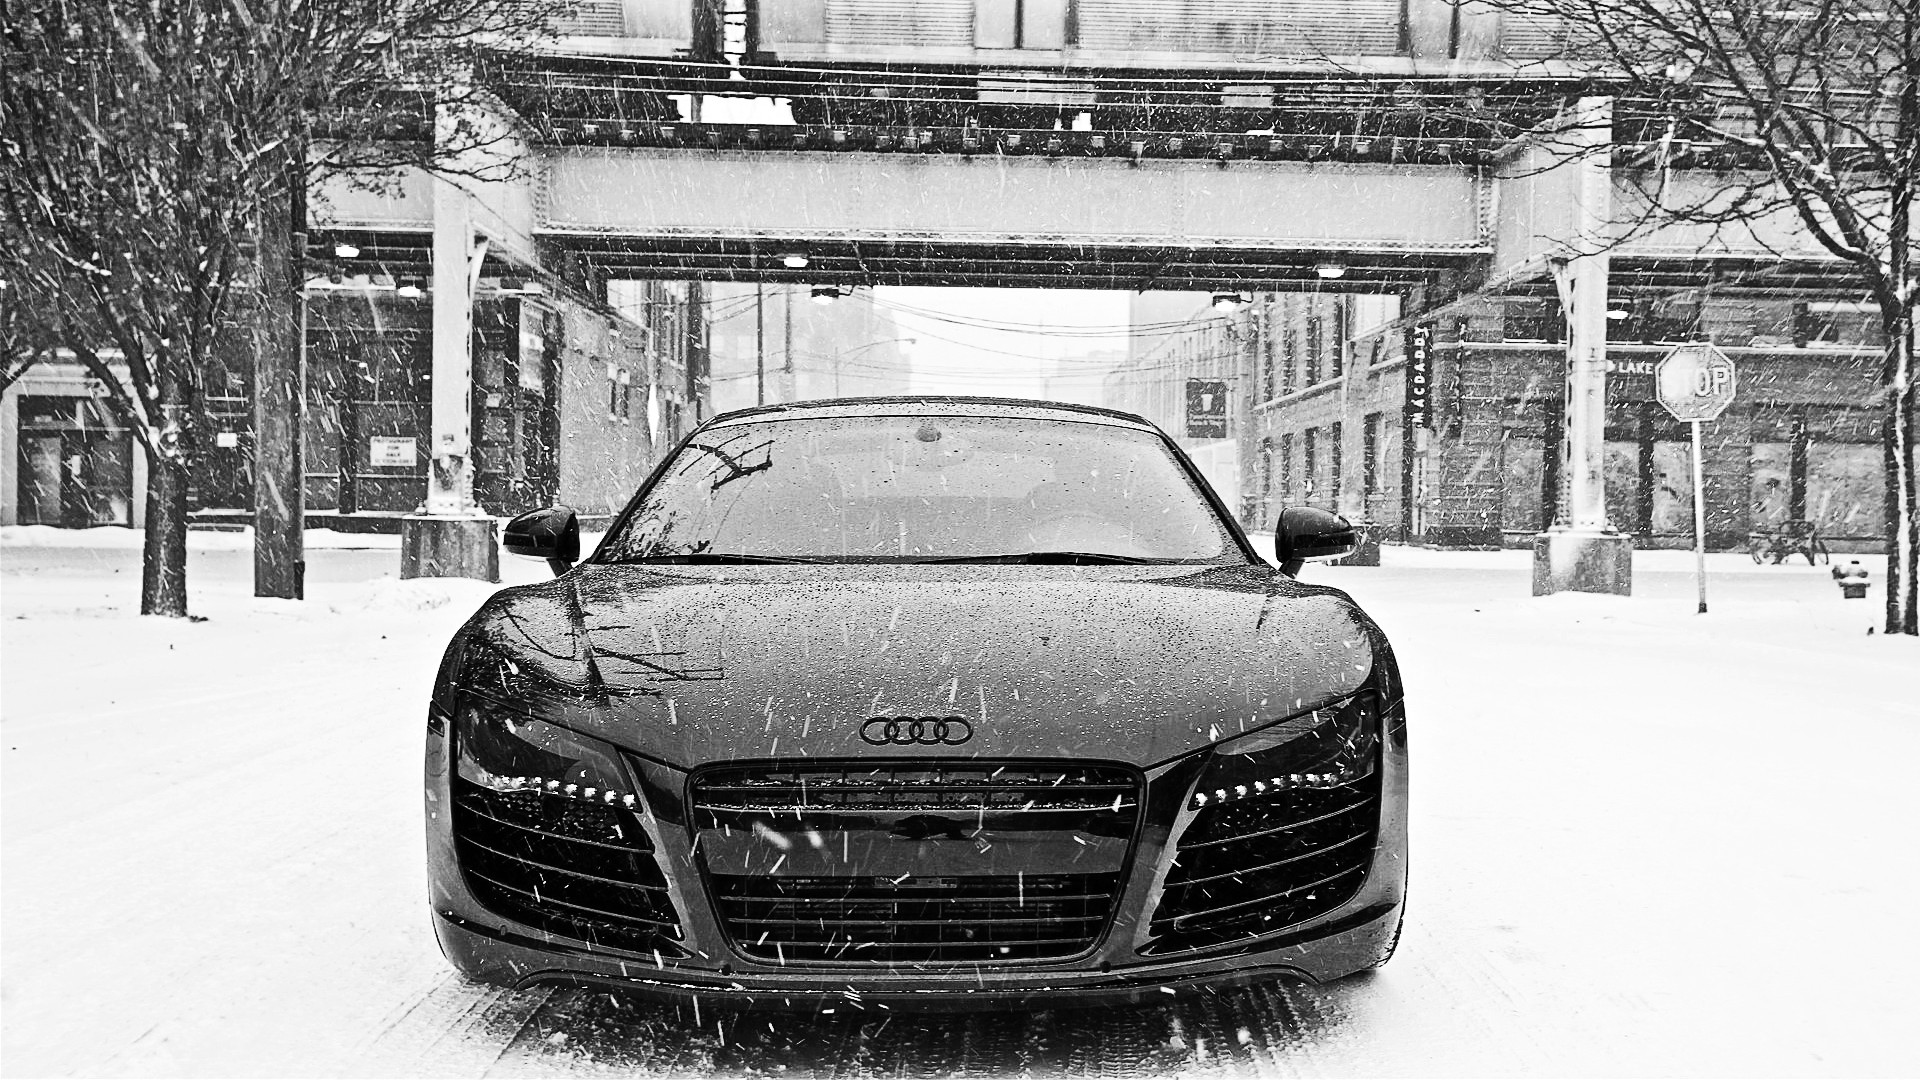 Audi R8 in Snow Wallpapers HD Wallpapers 1920x1080